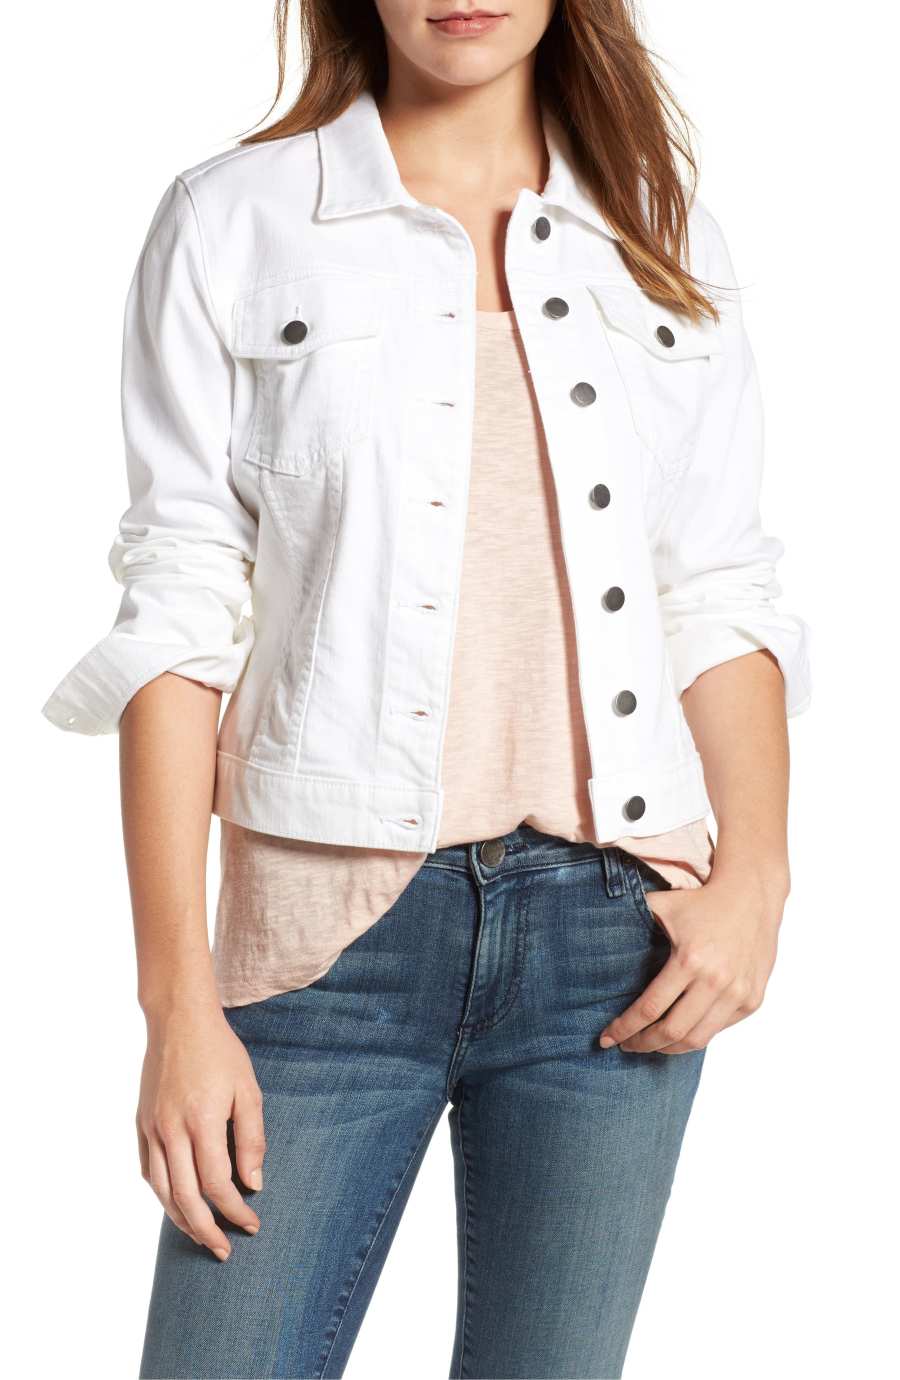 Nordstrom-Favorite Denim Jacket Is 40% Off for a Limited Time | Us Weekly